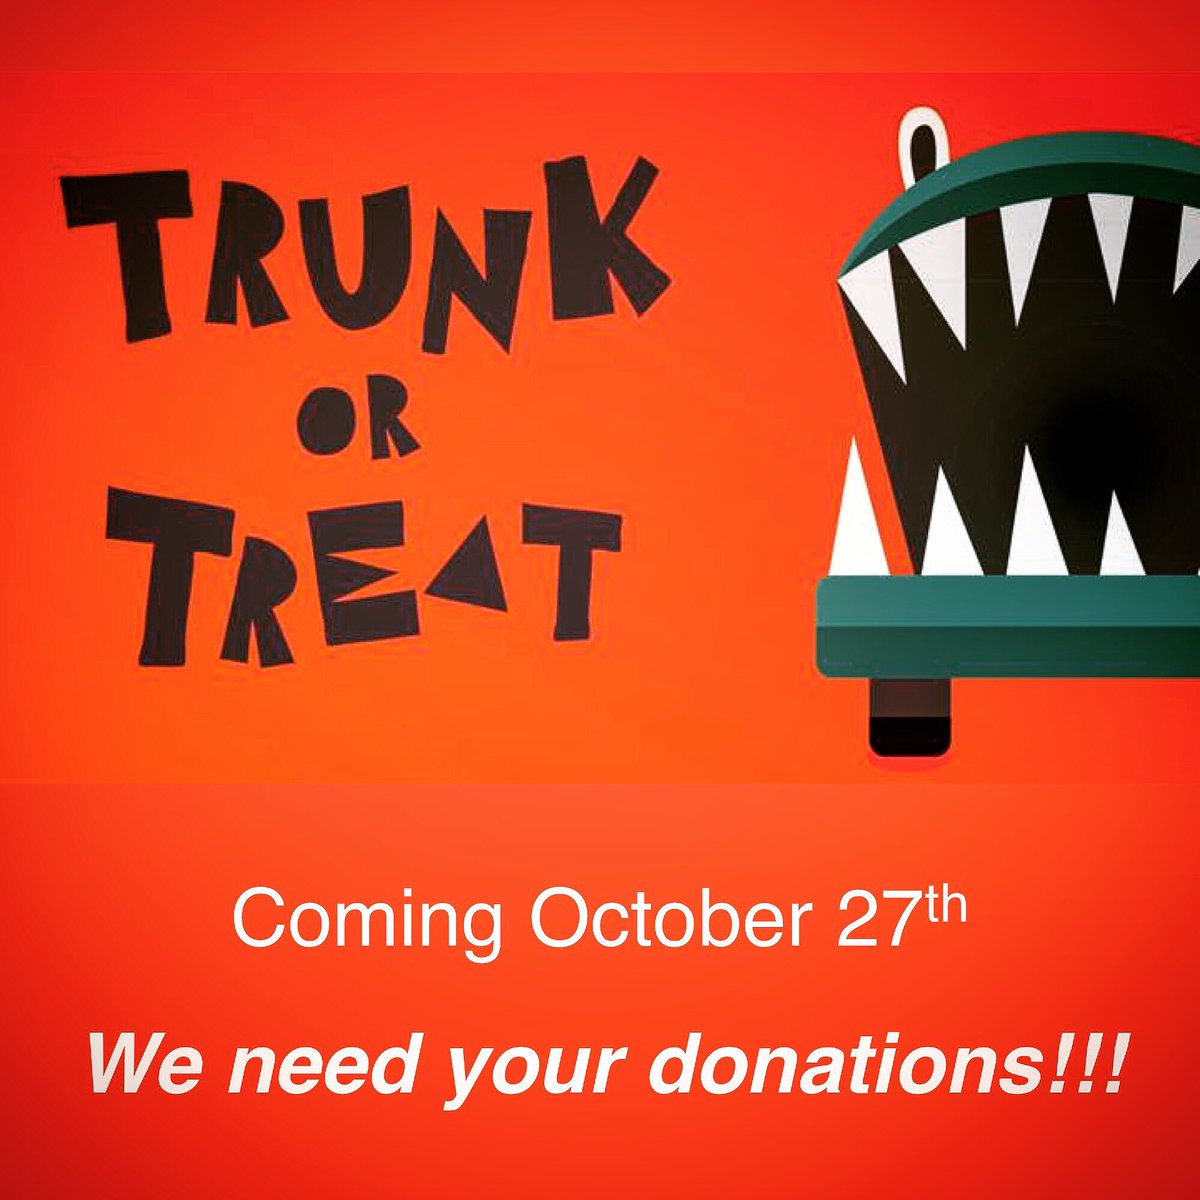 Greetings CPC, Trunk or Treat is almost here & we need your donations! Stop by the Atrium this Sunday to find out more. This is the biggest community outreach we do each year. Help us make it a great night for all! #cpcgoodyear #ecochurch #trunkortreat #goodyearaz #phoenixchurch